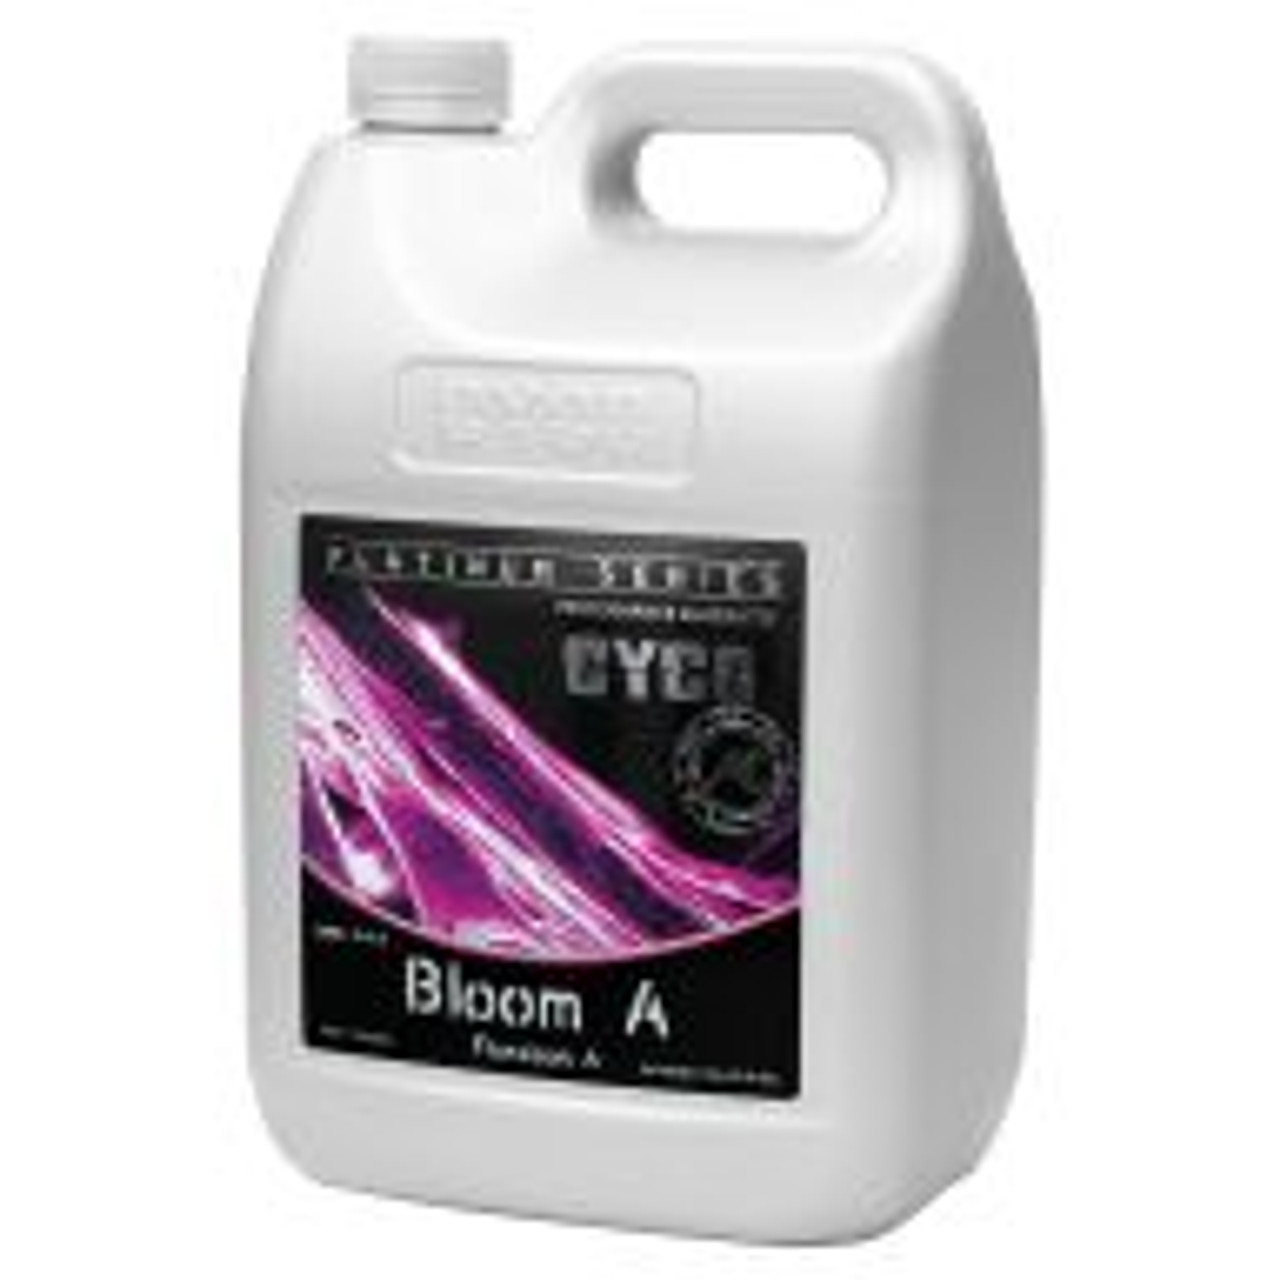 Cyco Bloom A and B provide potassium that aids in fruit quality, calcium for normal transport and retention of nutrients, and magnesium to help activate plant enzymes needed for growth. Together, every element in Bloom A and B plays a role in helping to produce the best quality fruit or flower within the bloom stage of a plants life cycle.